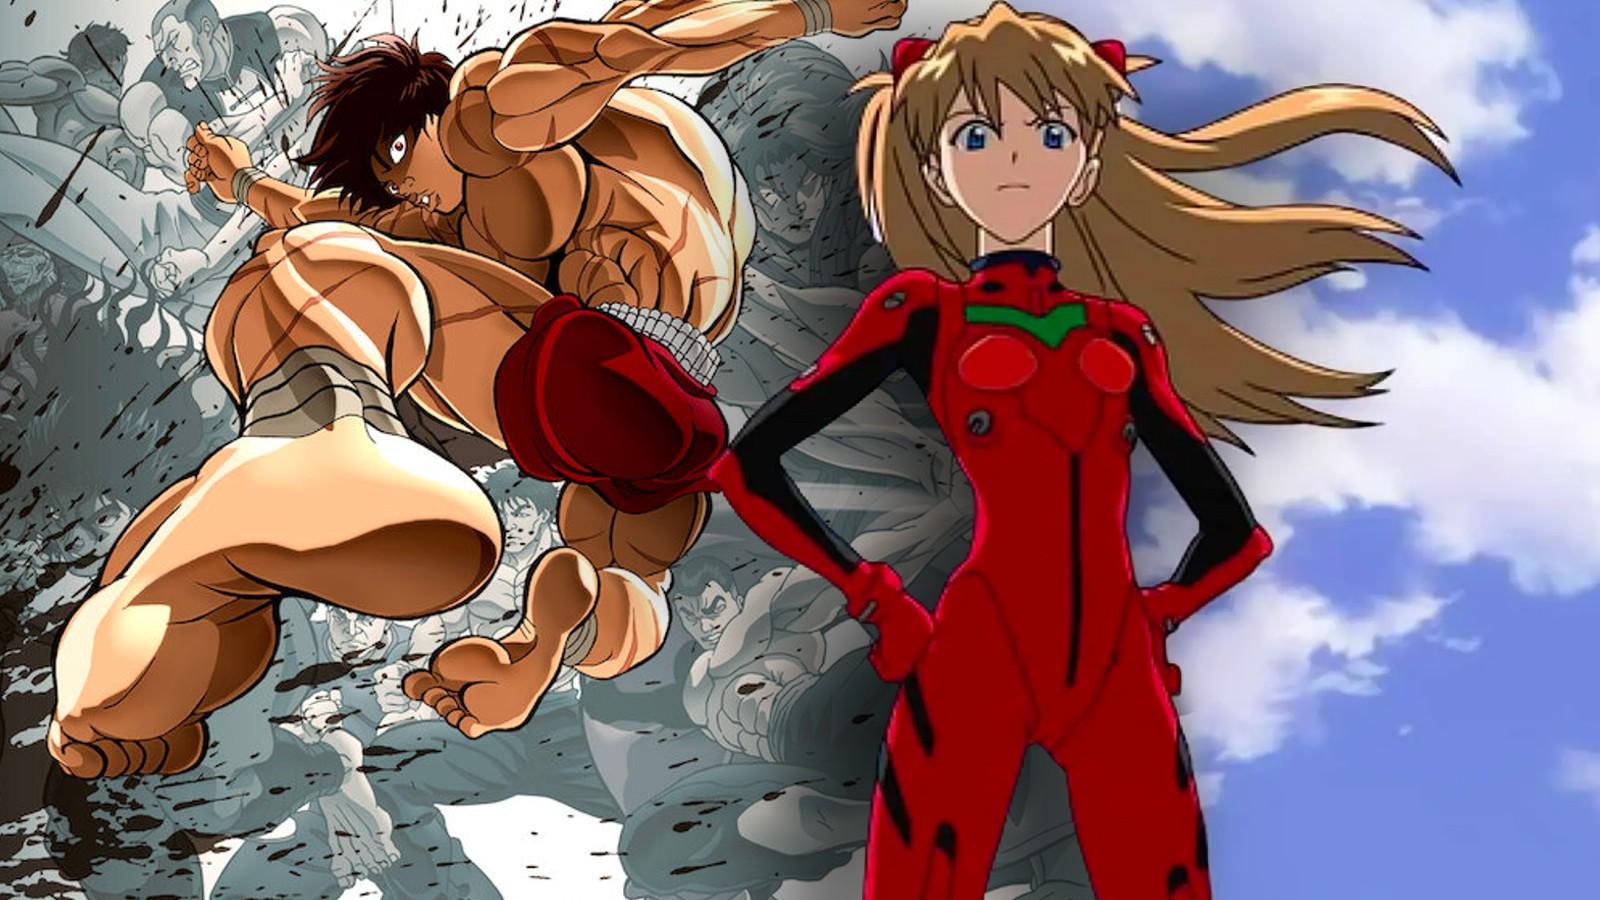 Top 50 Anime Shows and Movies on US Netflix - What's on Netflix